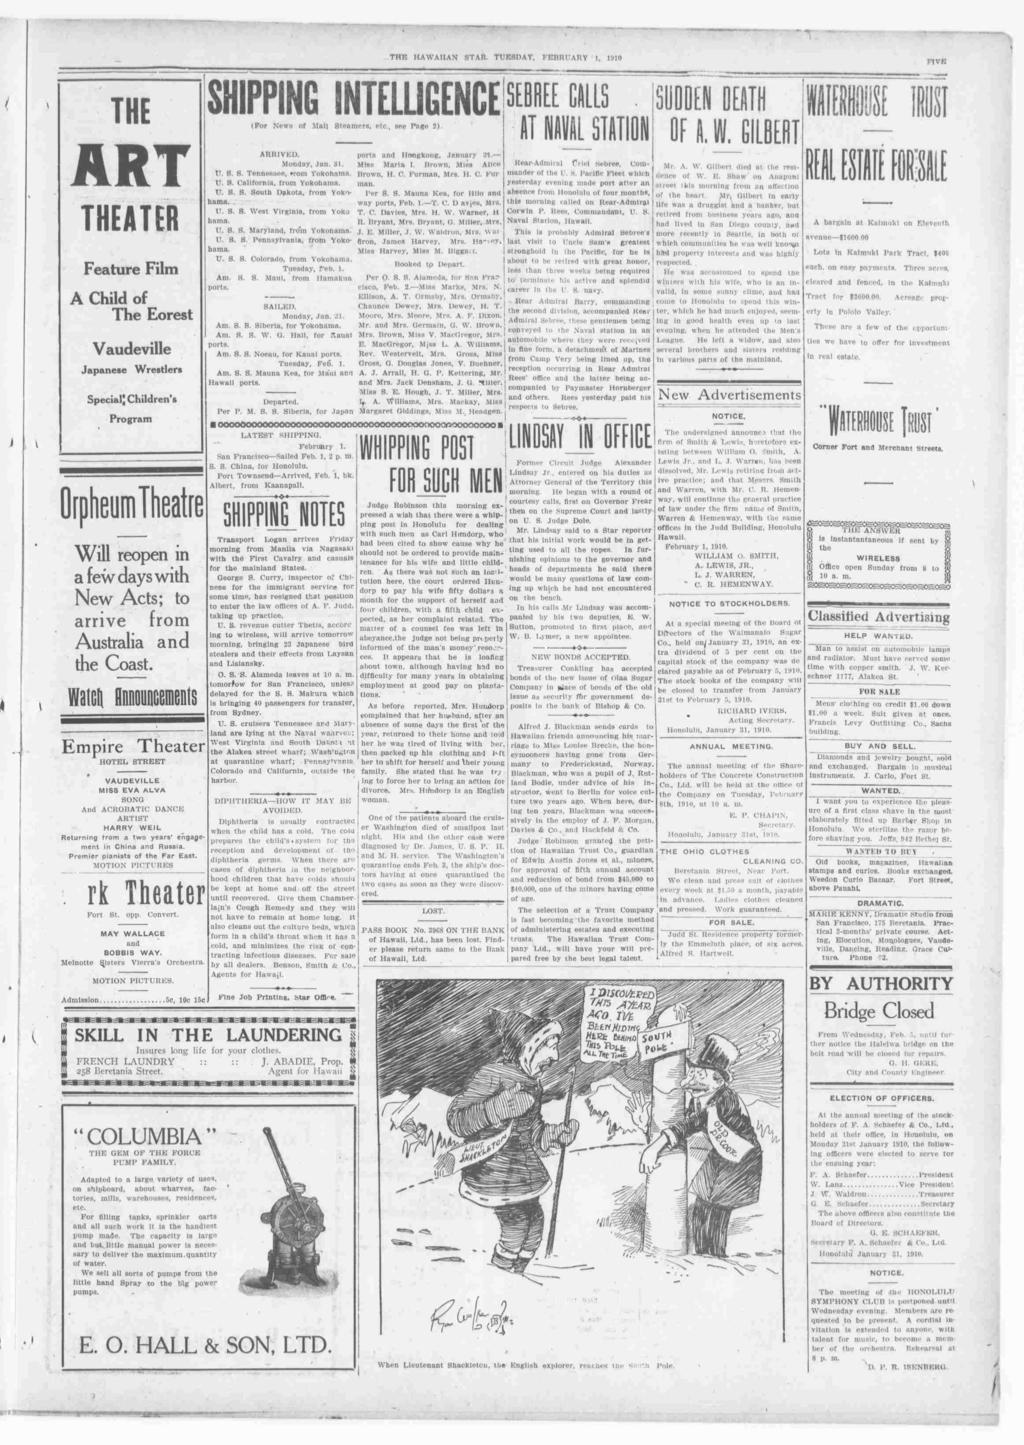 --THE HAWAAN STAR TUESDAY, FEBRUARY 1, 1910 FVE V j THE n j&w THEATER Feaure Flm A Chld of The Eores Vaudevlle Japanese Wreslers s Specal Chldrens Program DrpheumTheare Wll reopen n a few days wh New